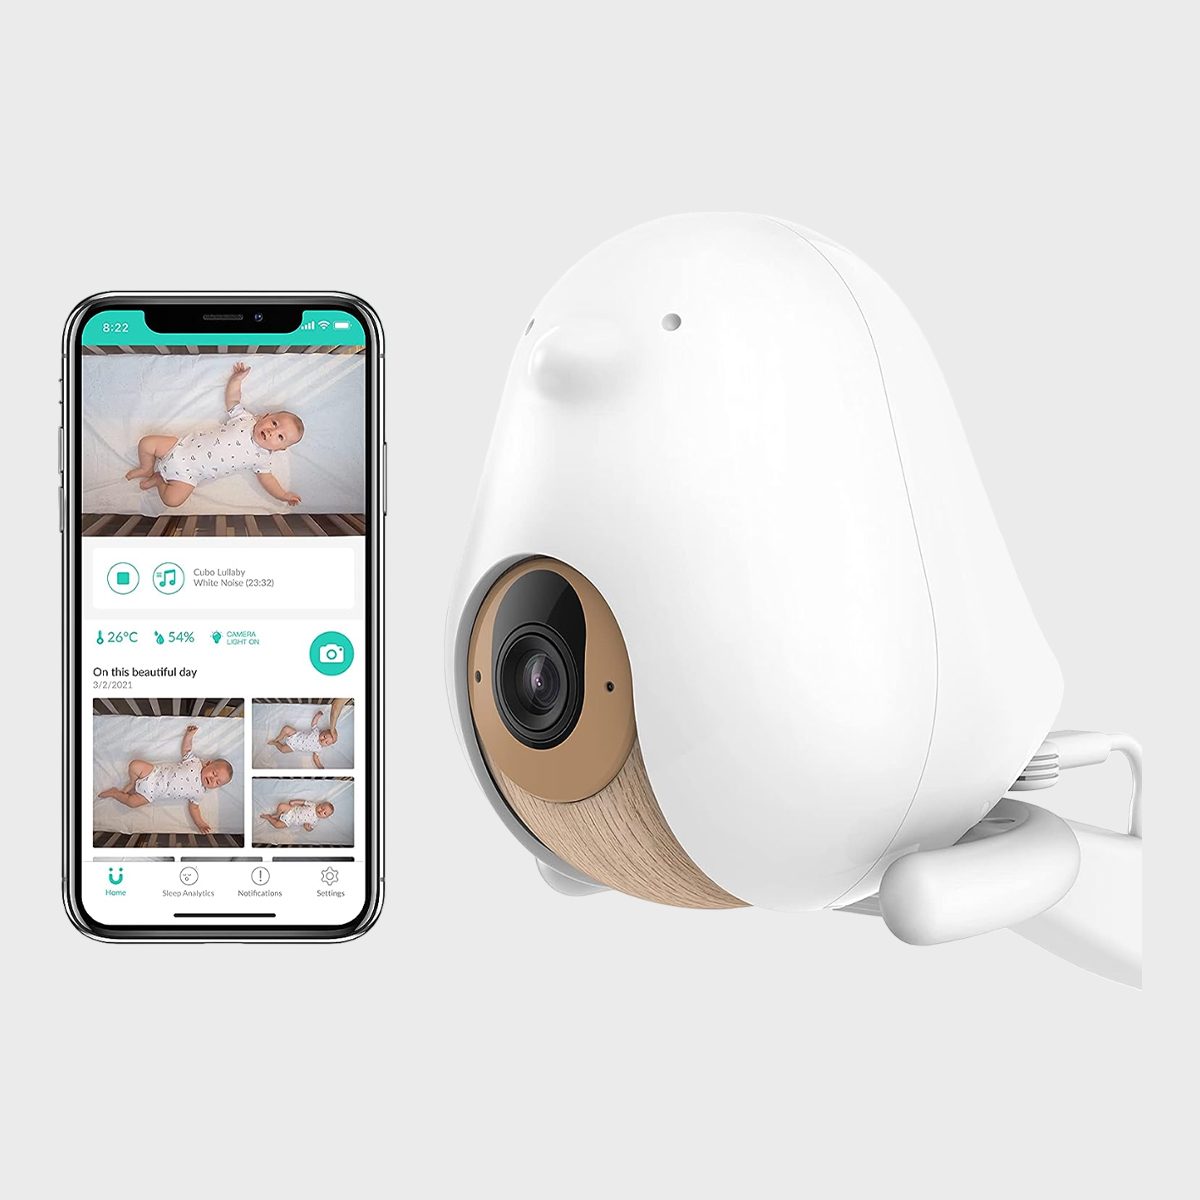 <p>Forward-thinking parents are going to love this futuristic-feeling <a href="https://www.amazon.com/Cubo-Ai-Plus-Smart-Monitor/dp/B08C4Y8S17" rel="nofollow noopener noreferrer">Cubo Ai Plus Smart baby monitor</a>. It sends alerts in real-time if it detects the baby's mouth and nose are covered or if they're face down, and it even has HD night vision, cry detection and a sleep analytics dashboard with easy-to-decipher statistics.</p> <p class="listicle-page__cta-button-shop"><a class="shop-btn" href="https://www.amazon.com/Cubo-Ai-Plus-Smart-Monitor/dp/B08C4Y8S17">Shop Now</a></p>